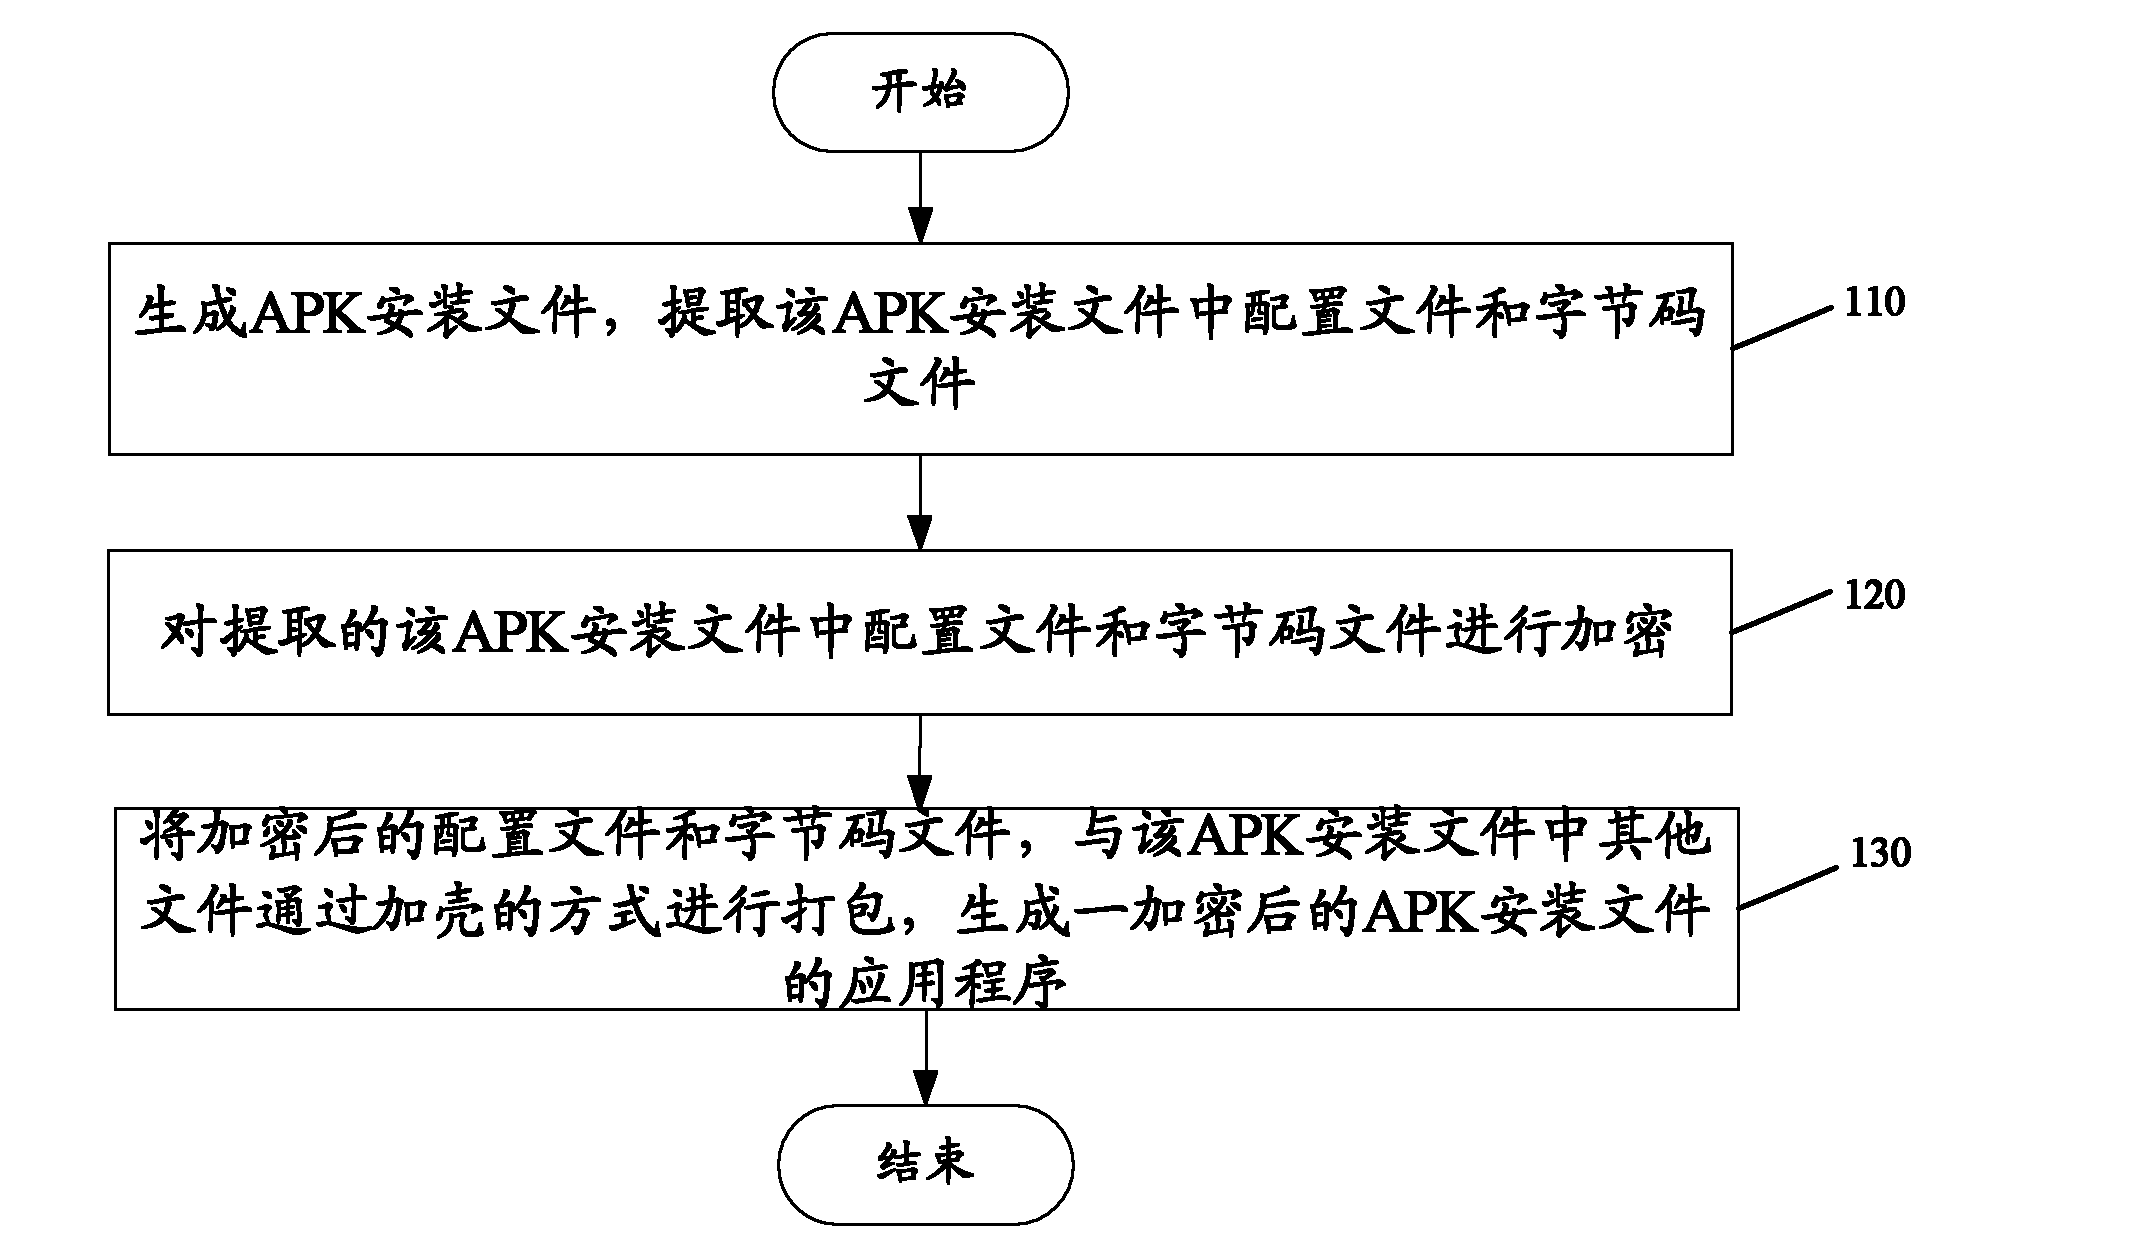 Android-based platform application installation control method and system